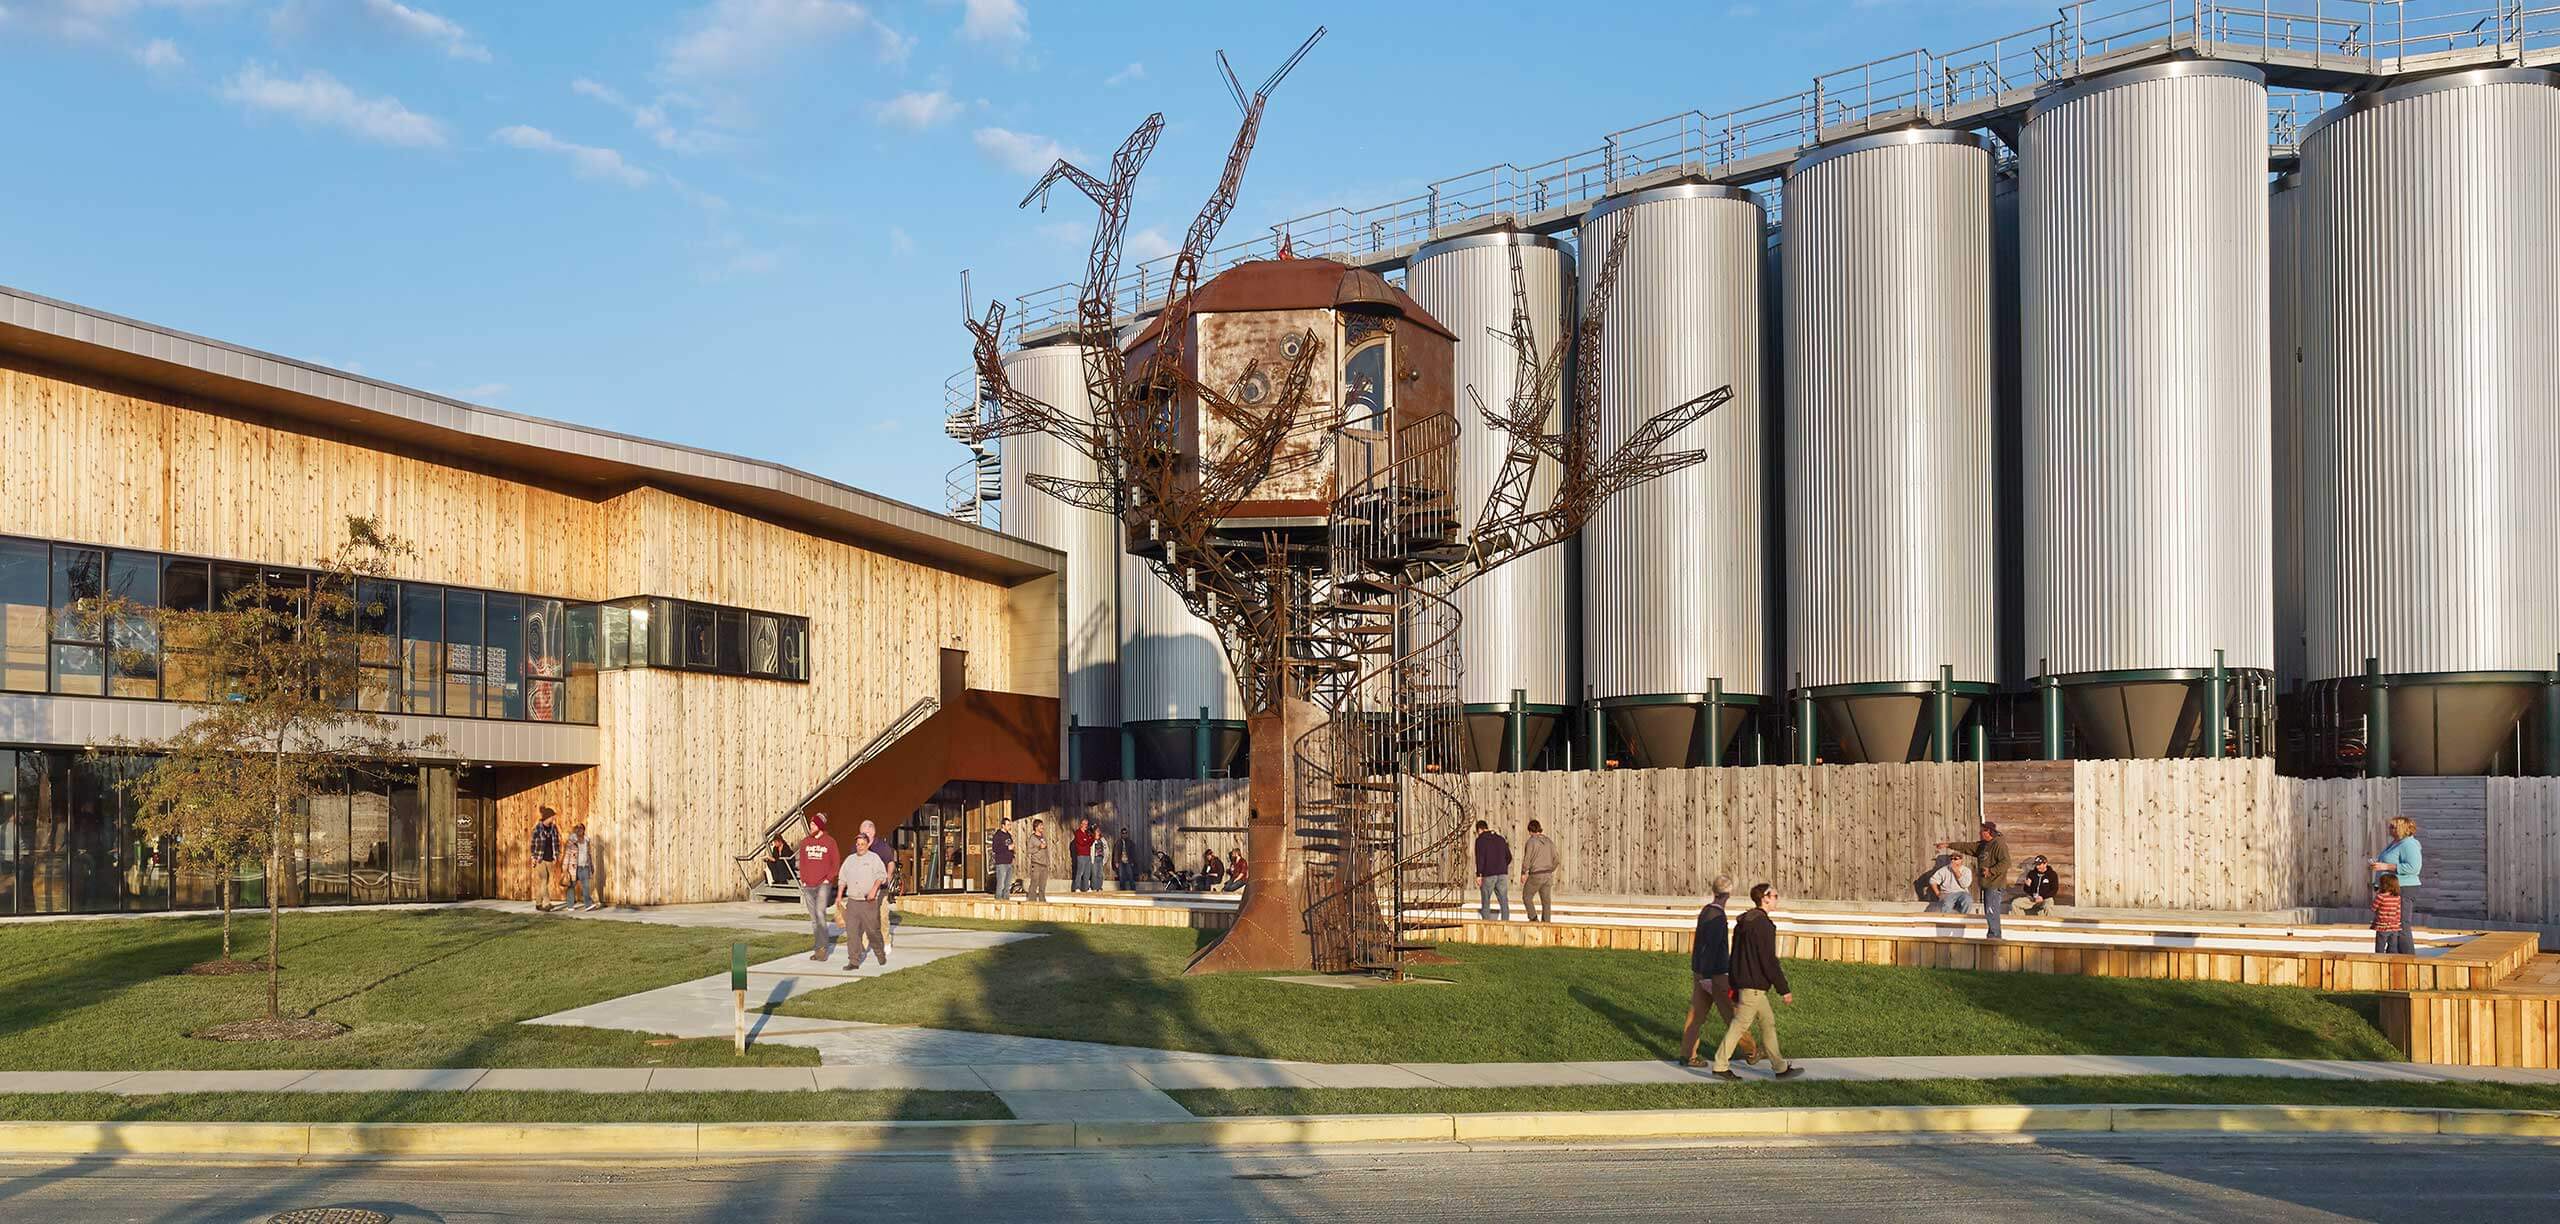 Dogfish Head's main brewery in Milton, Delaware